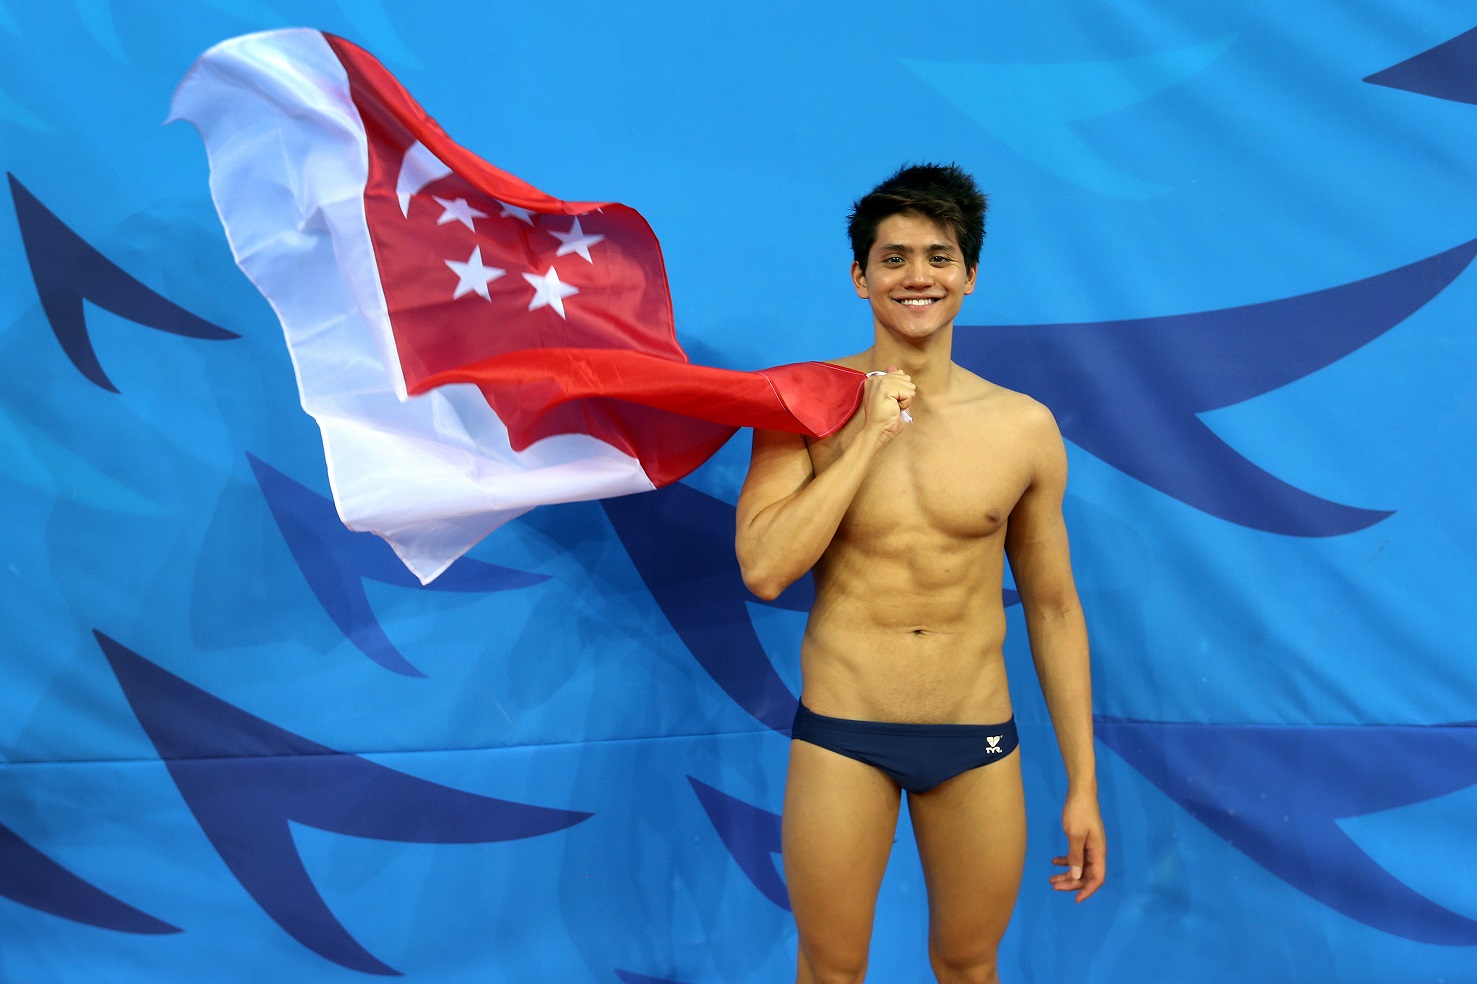 ST13092014-1425537404/syschooling28/Neo Xiaobin/Chua Siang Yee /[PHOTOGRAPHED ON SEP 26] Profile of Singapore swimmer Joseph Schooling and his parents Colin and May Schooling. /Coverage of the Asian Games 2014 held in Incheon, South Korea from Sep 17 to Oct 4. /Location: Athletes' Village, Incheon, South Korea